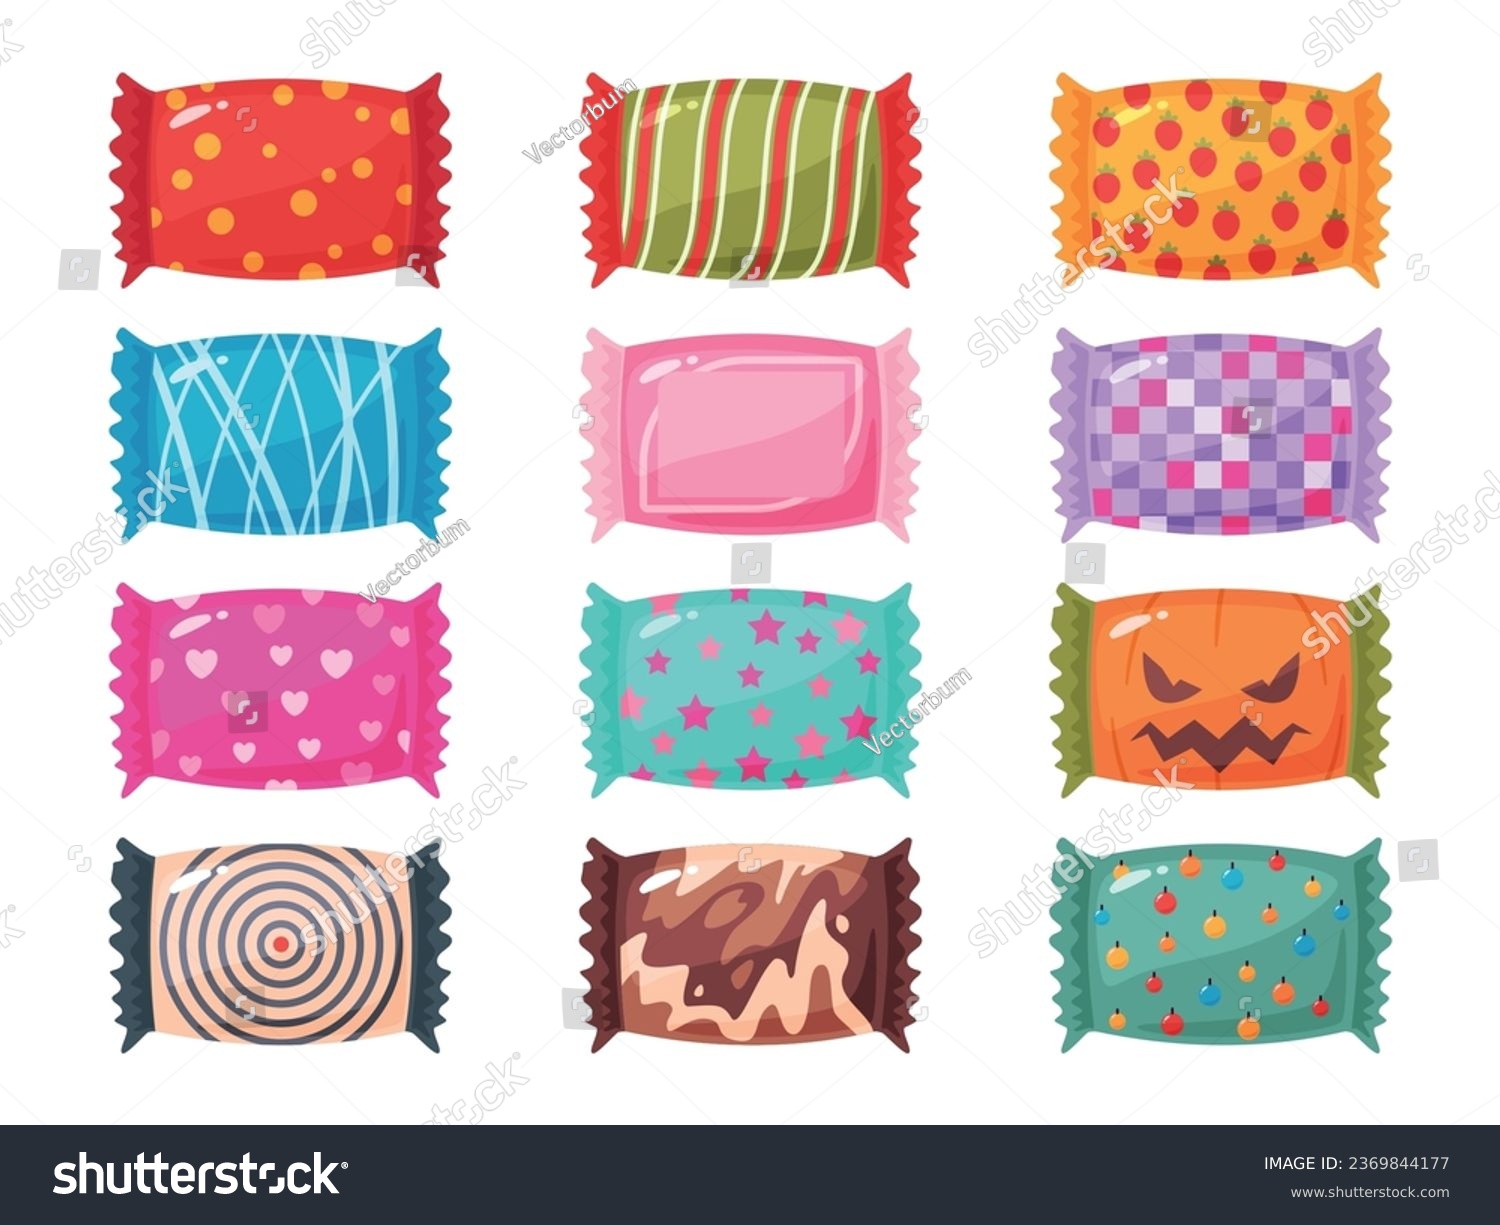 Candy in different wrappers. Cartoon sugar product in various colors and patterns packing. Decorative wrap. Fruit caramel. Birthday or Halloween sweets. Toffee packet #2369844177